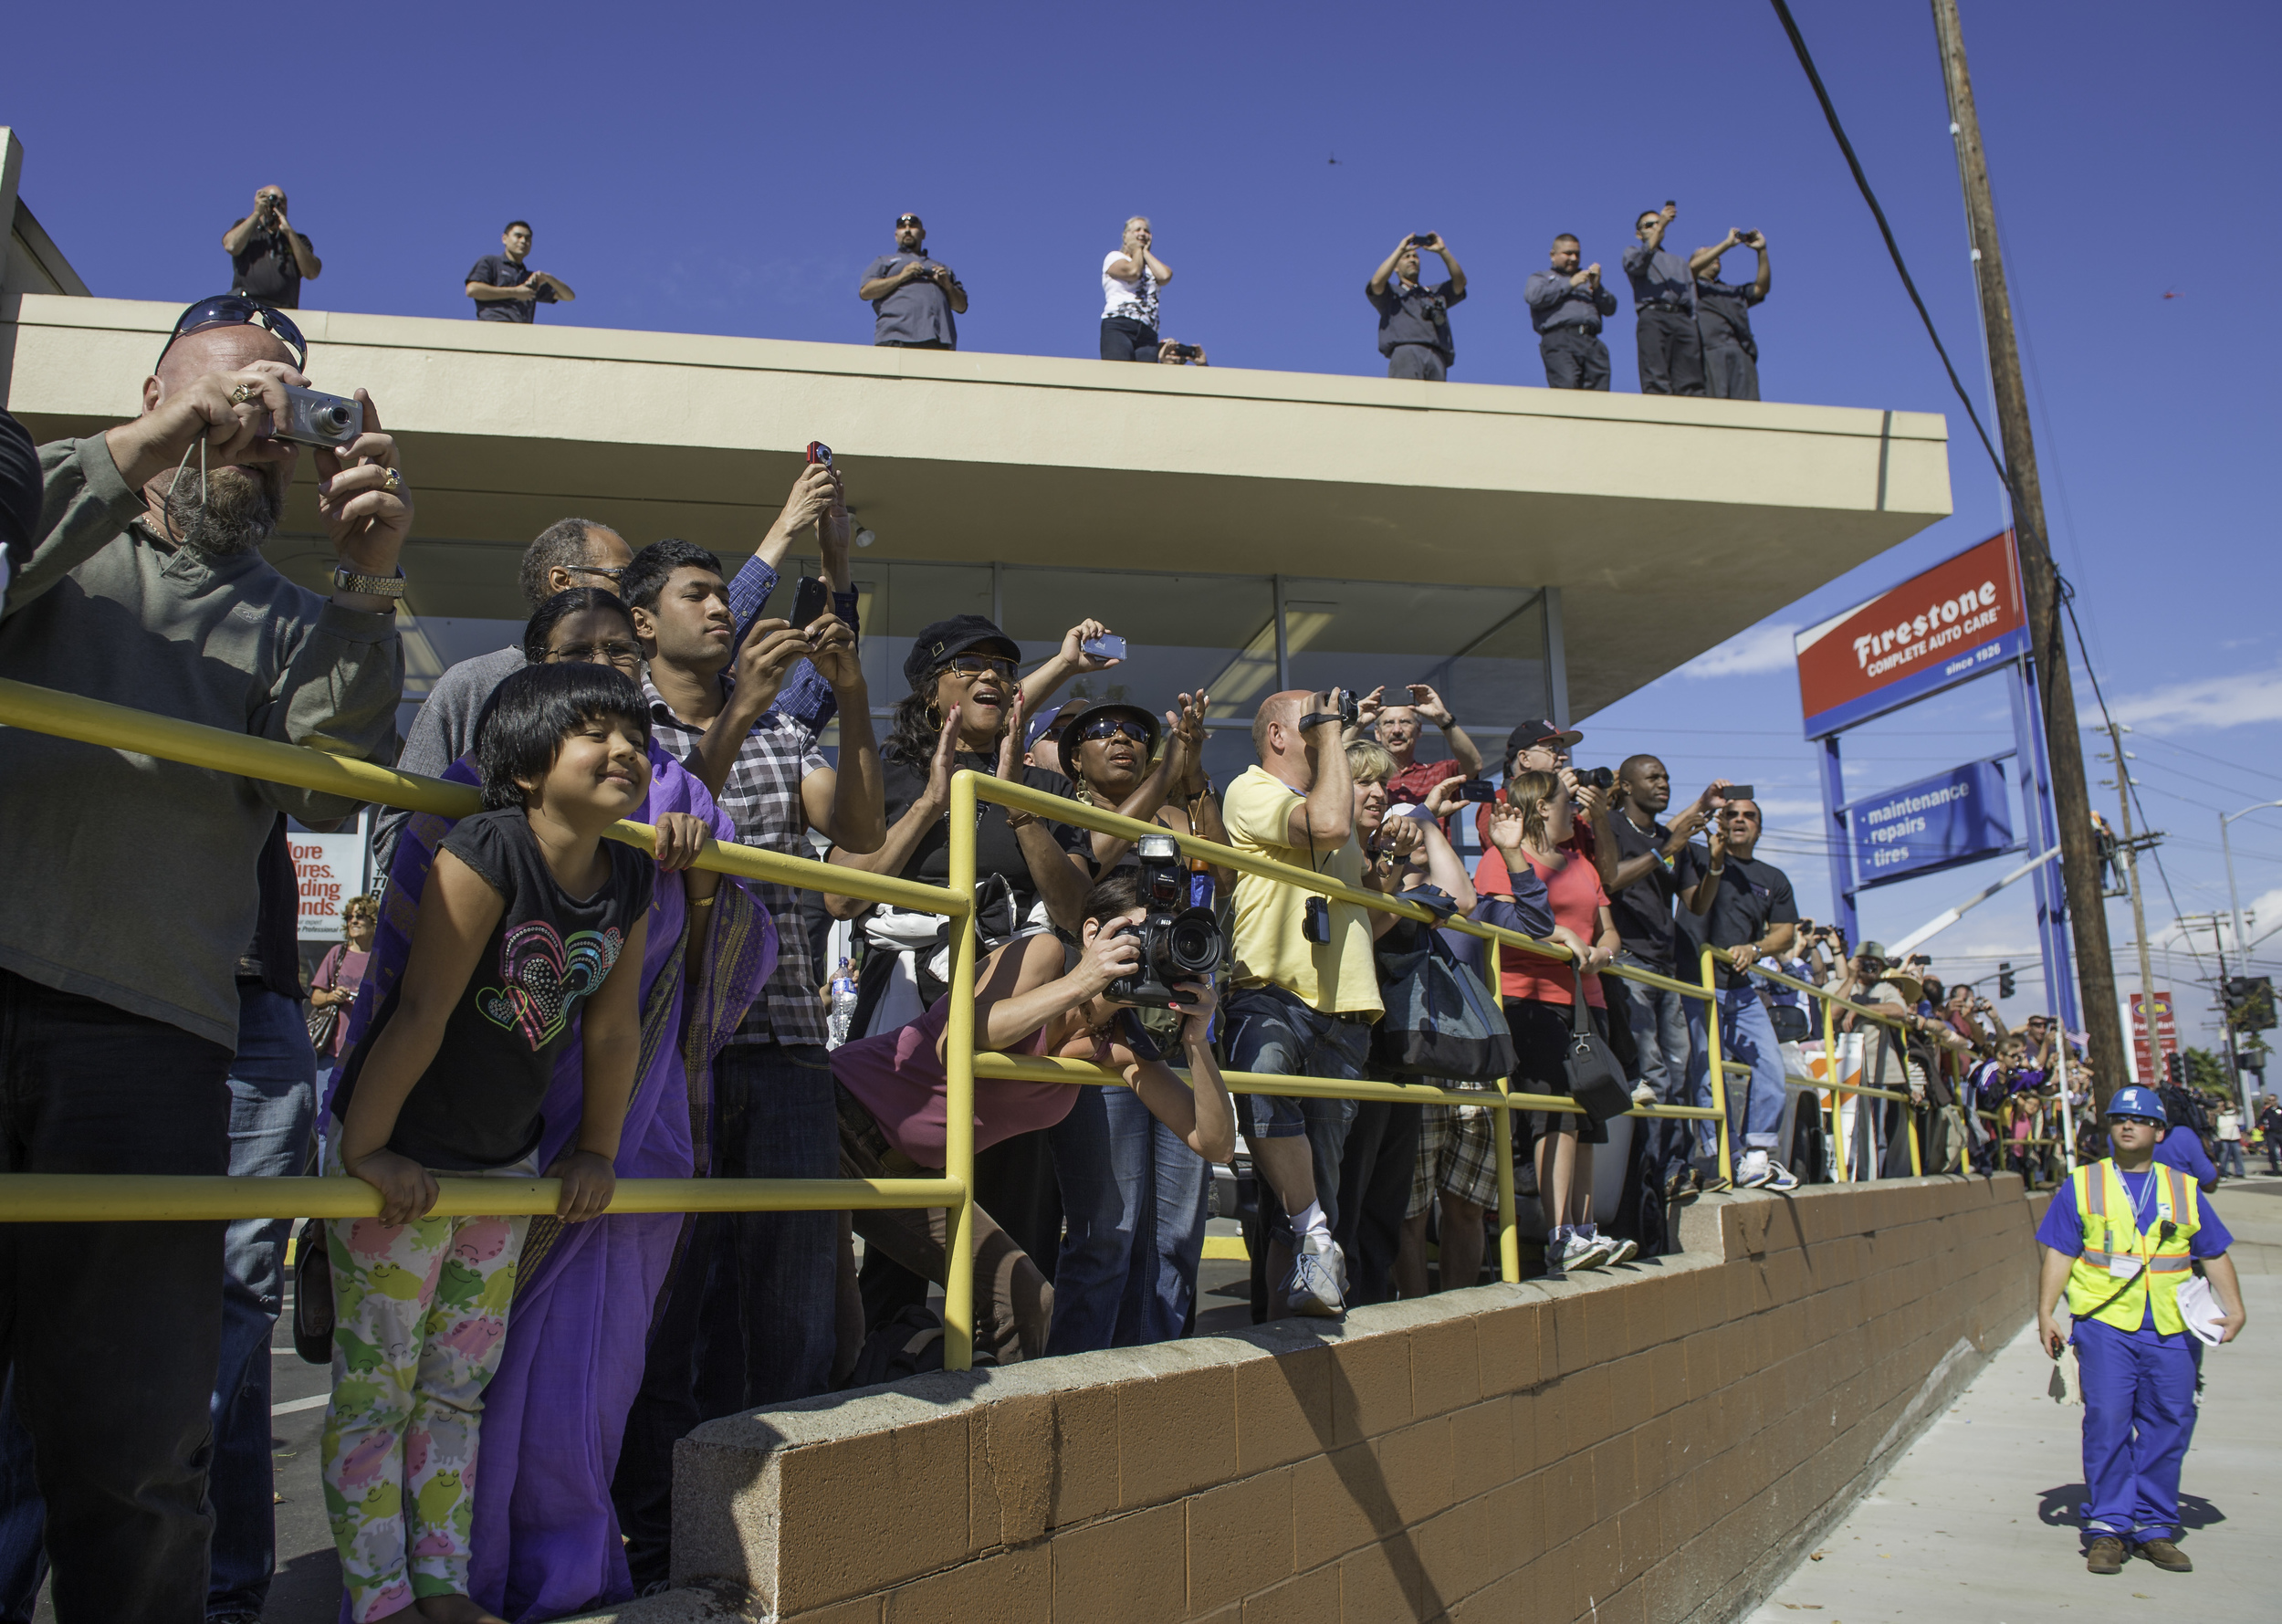  Spectators line up to watch space shuttle Endeavour as it passes by on its way to its new home at the California Science Center in Los Angeles, Friday, Oct. 12, 2012. Endeavour, built as a replacement for space shuttle Challenger, completed 25 missi